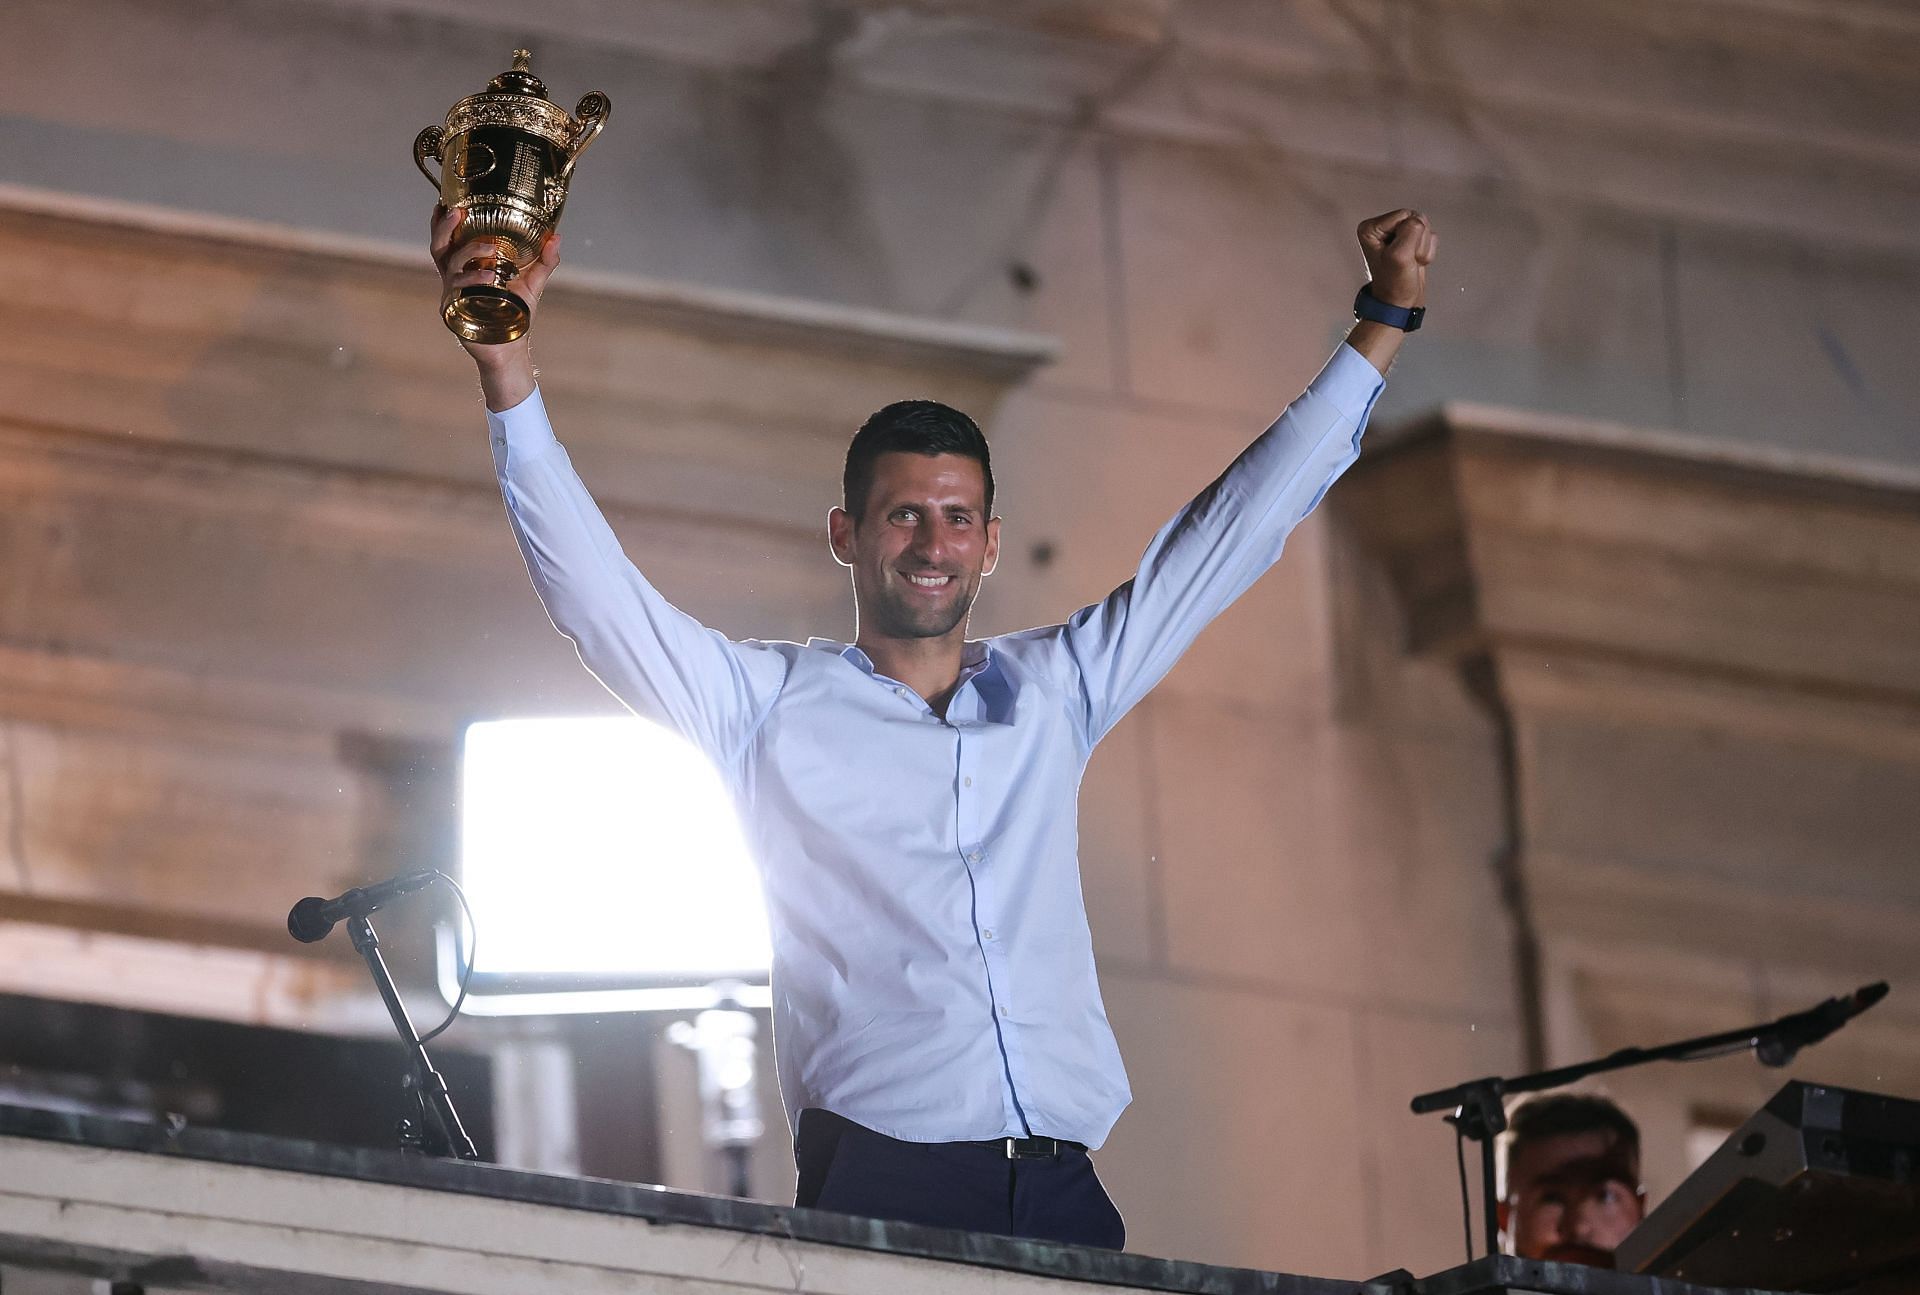 Novak Djokovic is currently ranked seventh in the ATP rankings